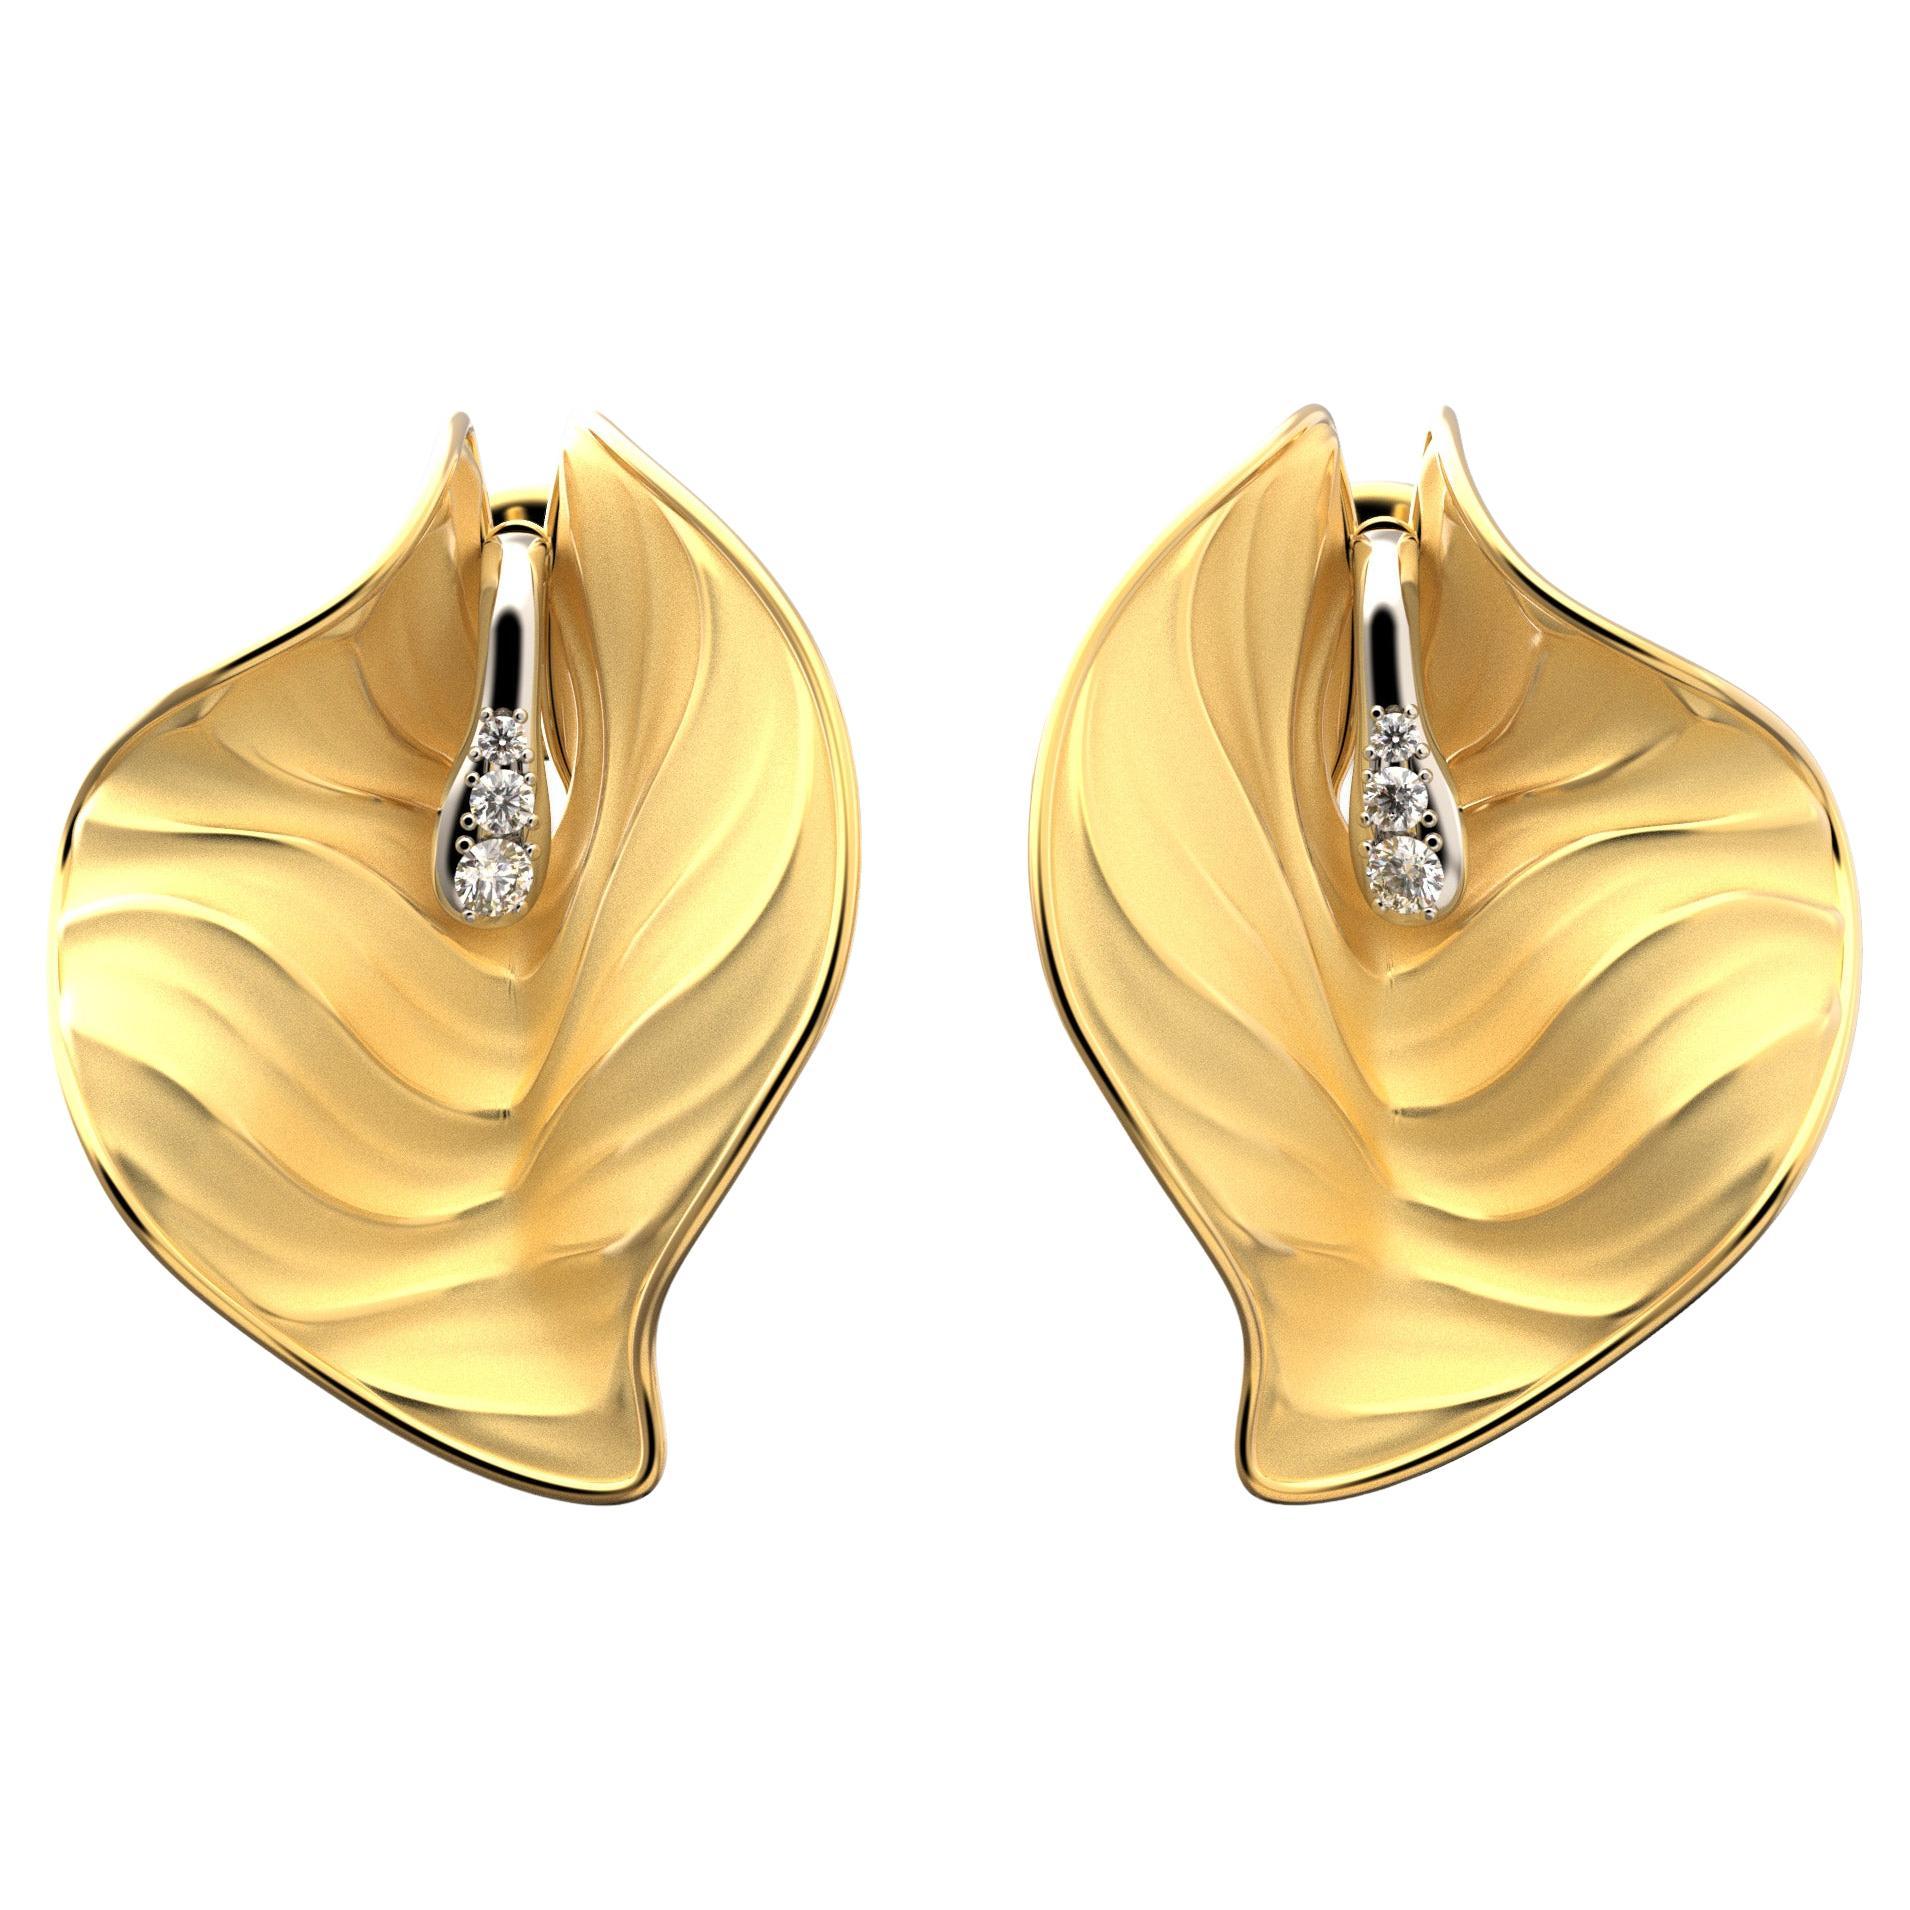 Oltremare Gioielli Gold Earrings Made in Italy, 14k Gold Earrings with Diamonds For Sale